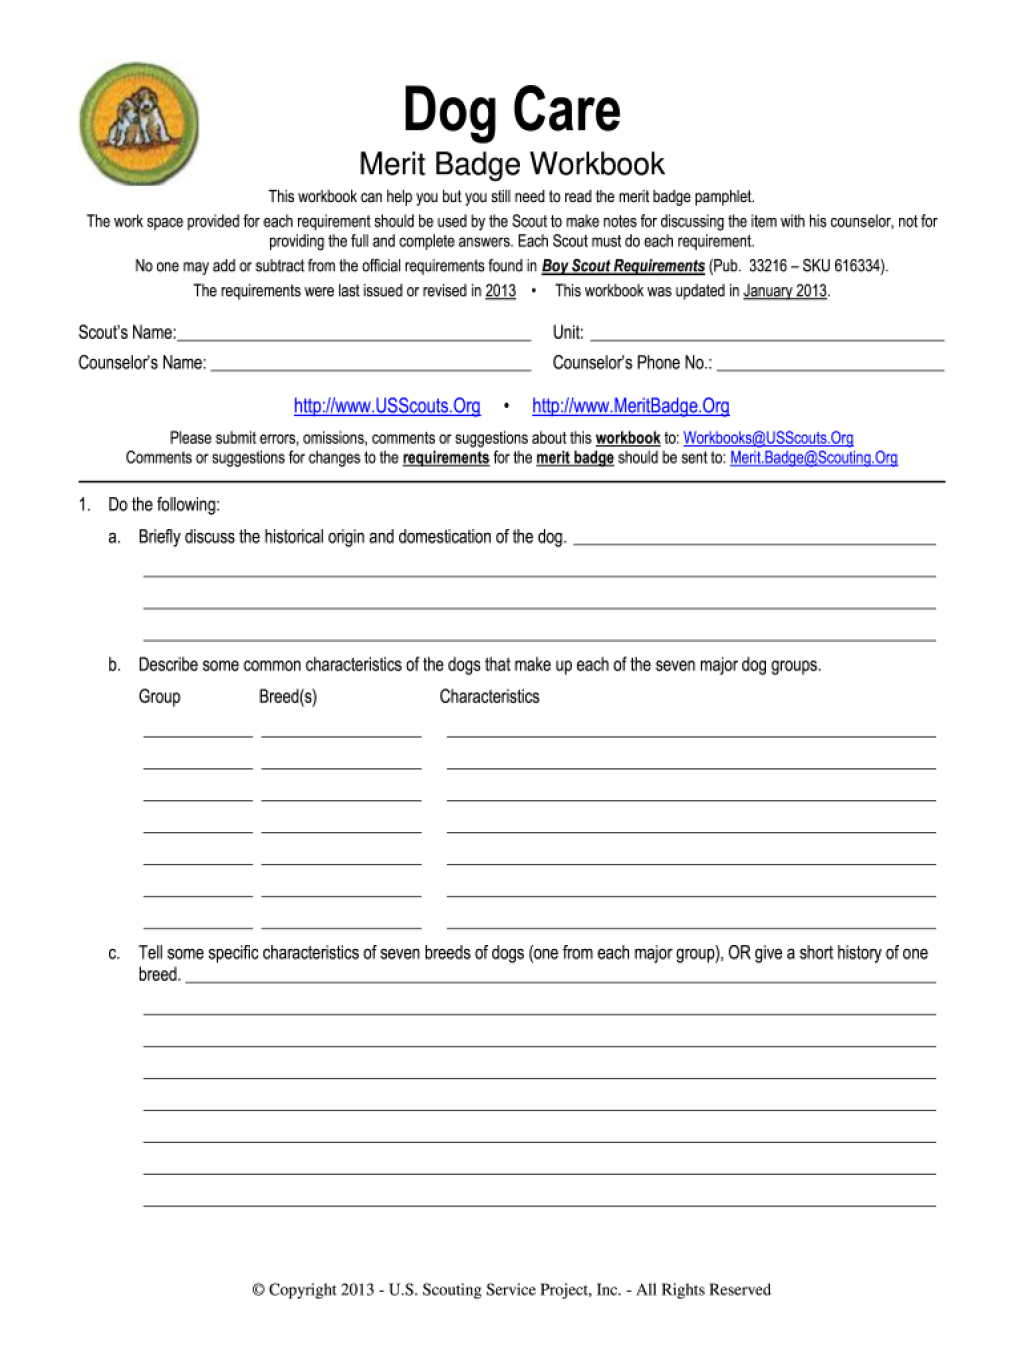 Picture of: Dog care merit badge pamphlet: Fill out & sign online  DocHub